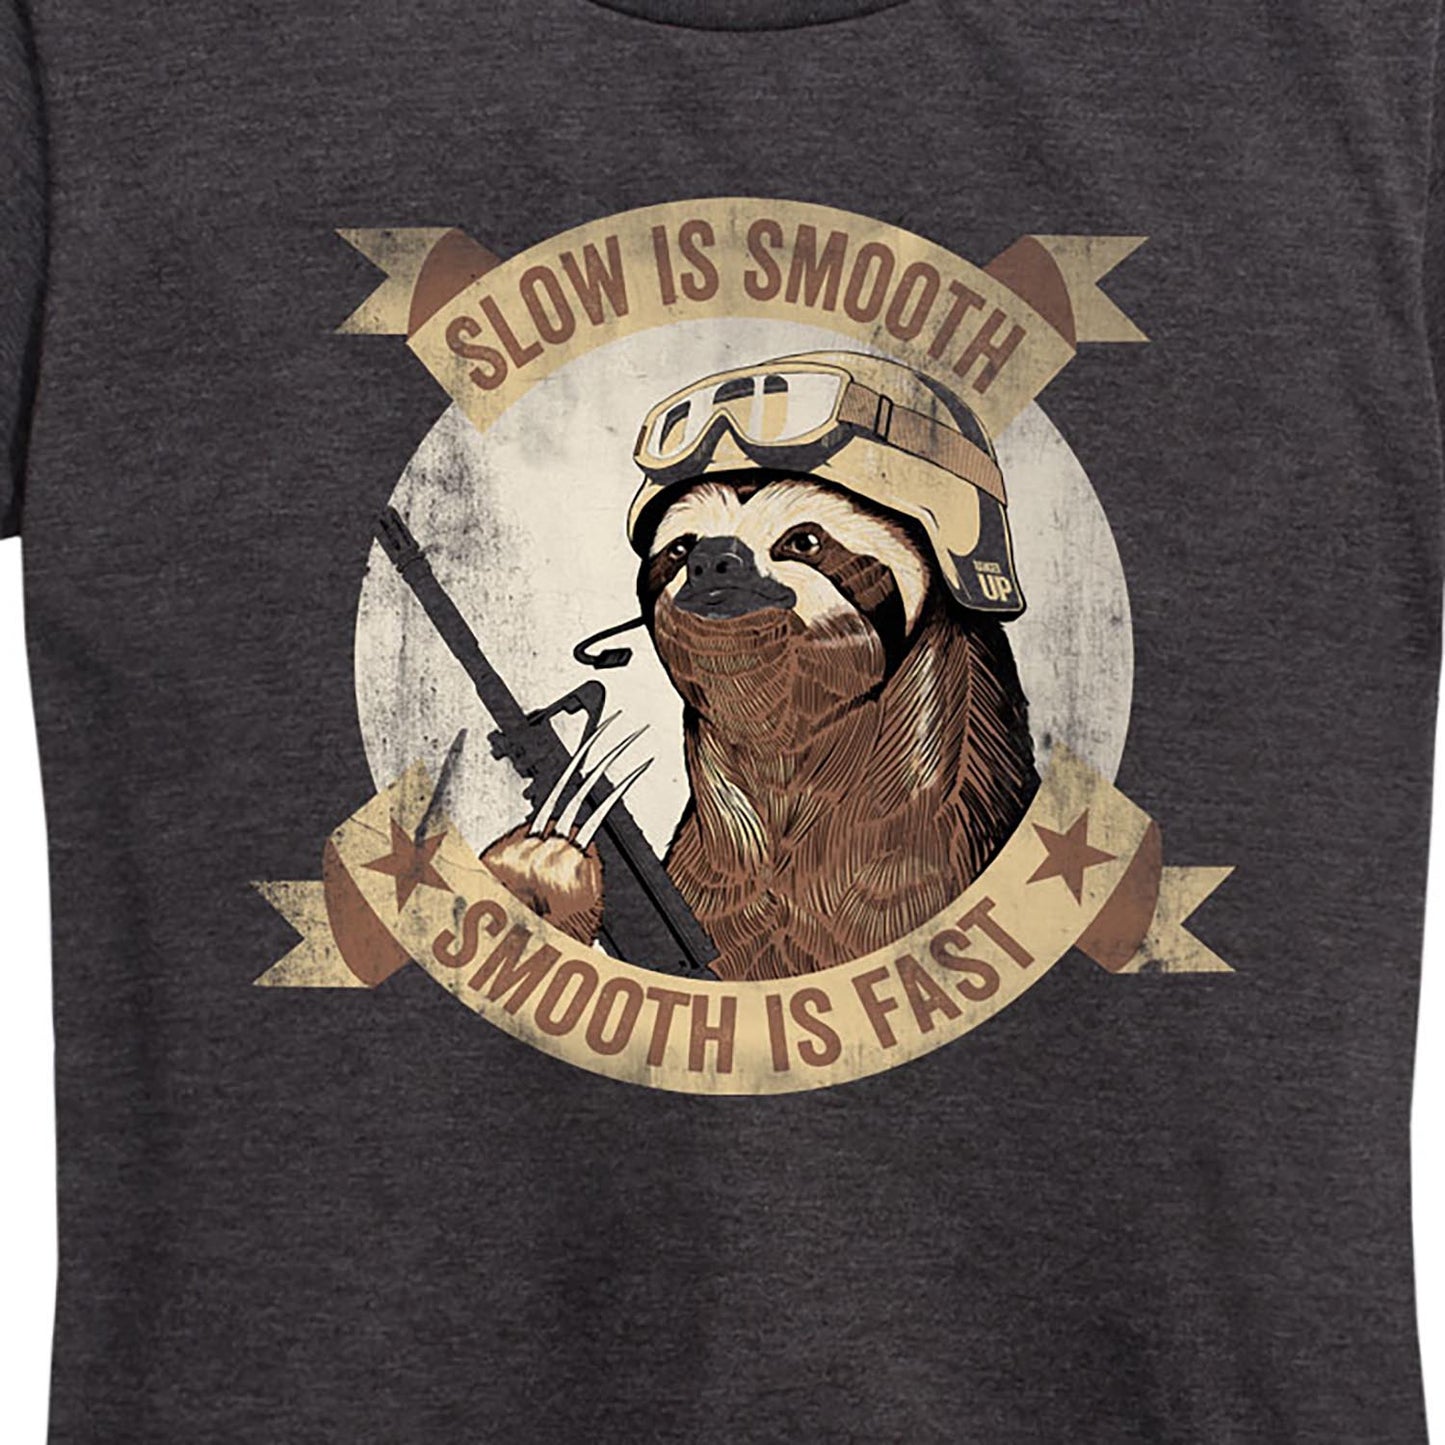 Women's Slow is Smooth Sloth Tee